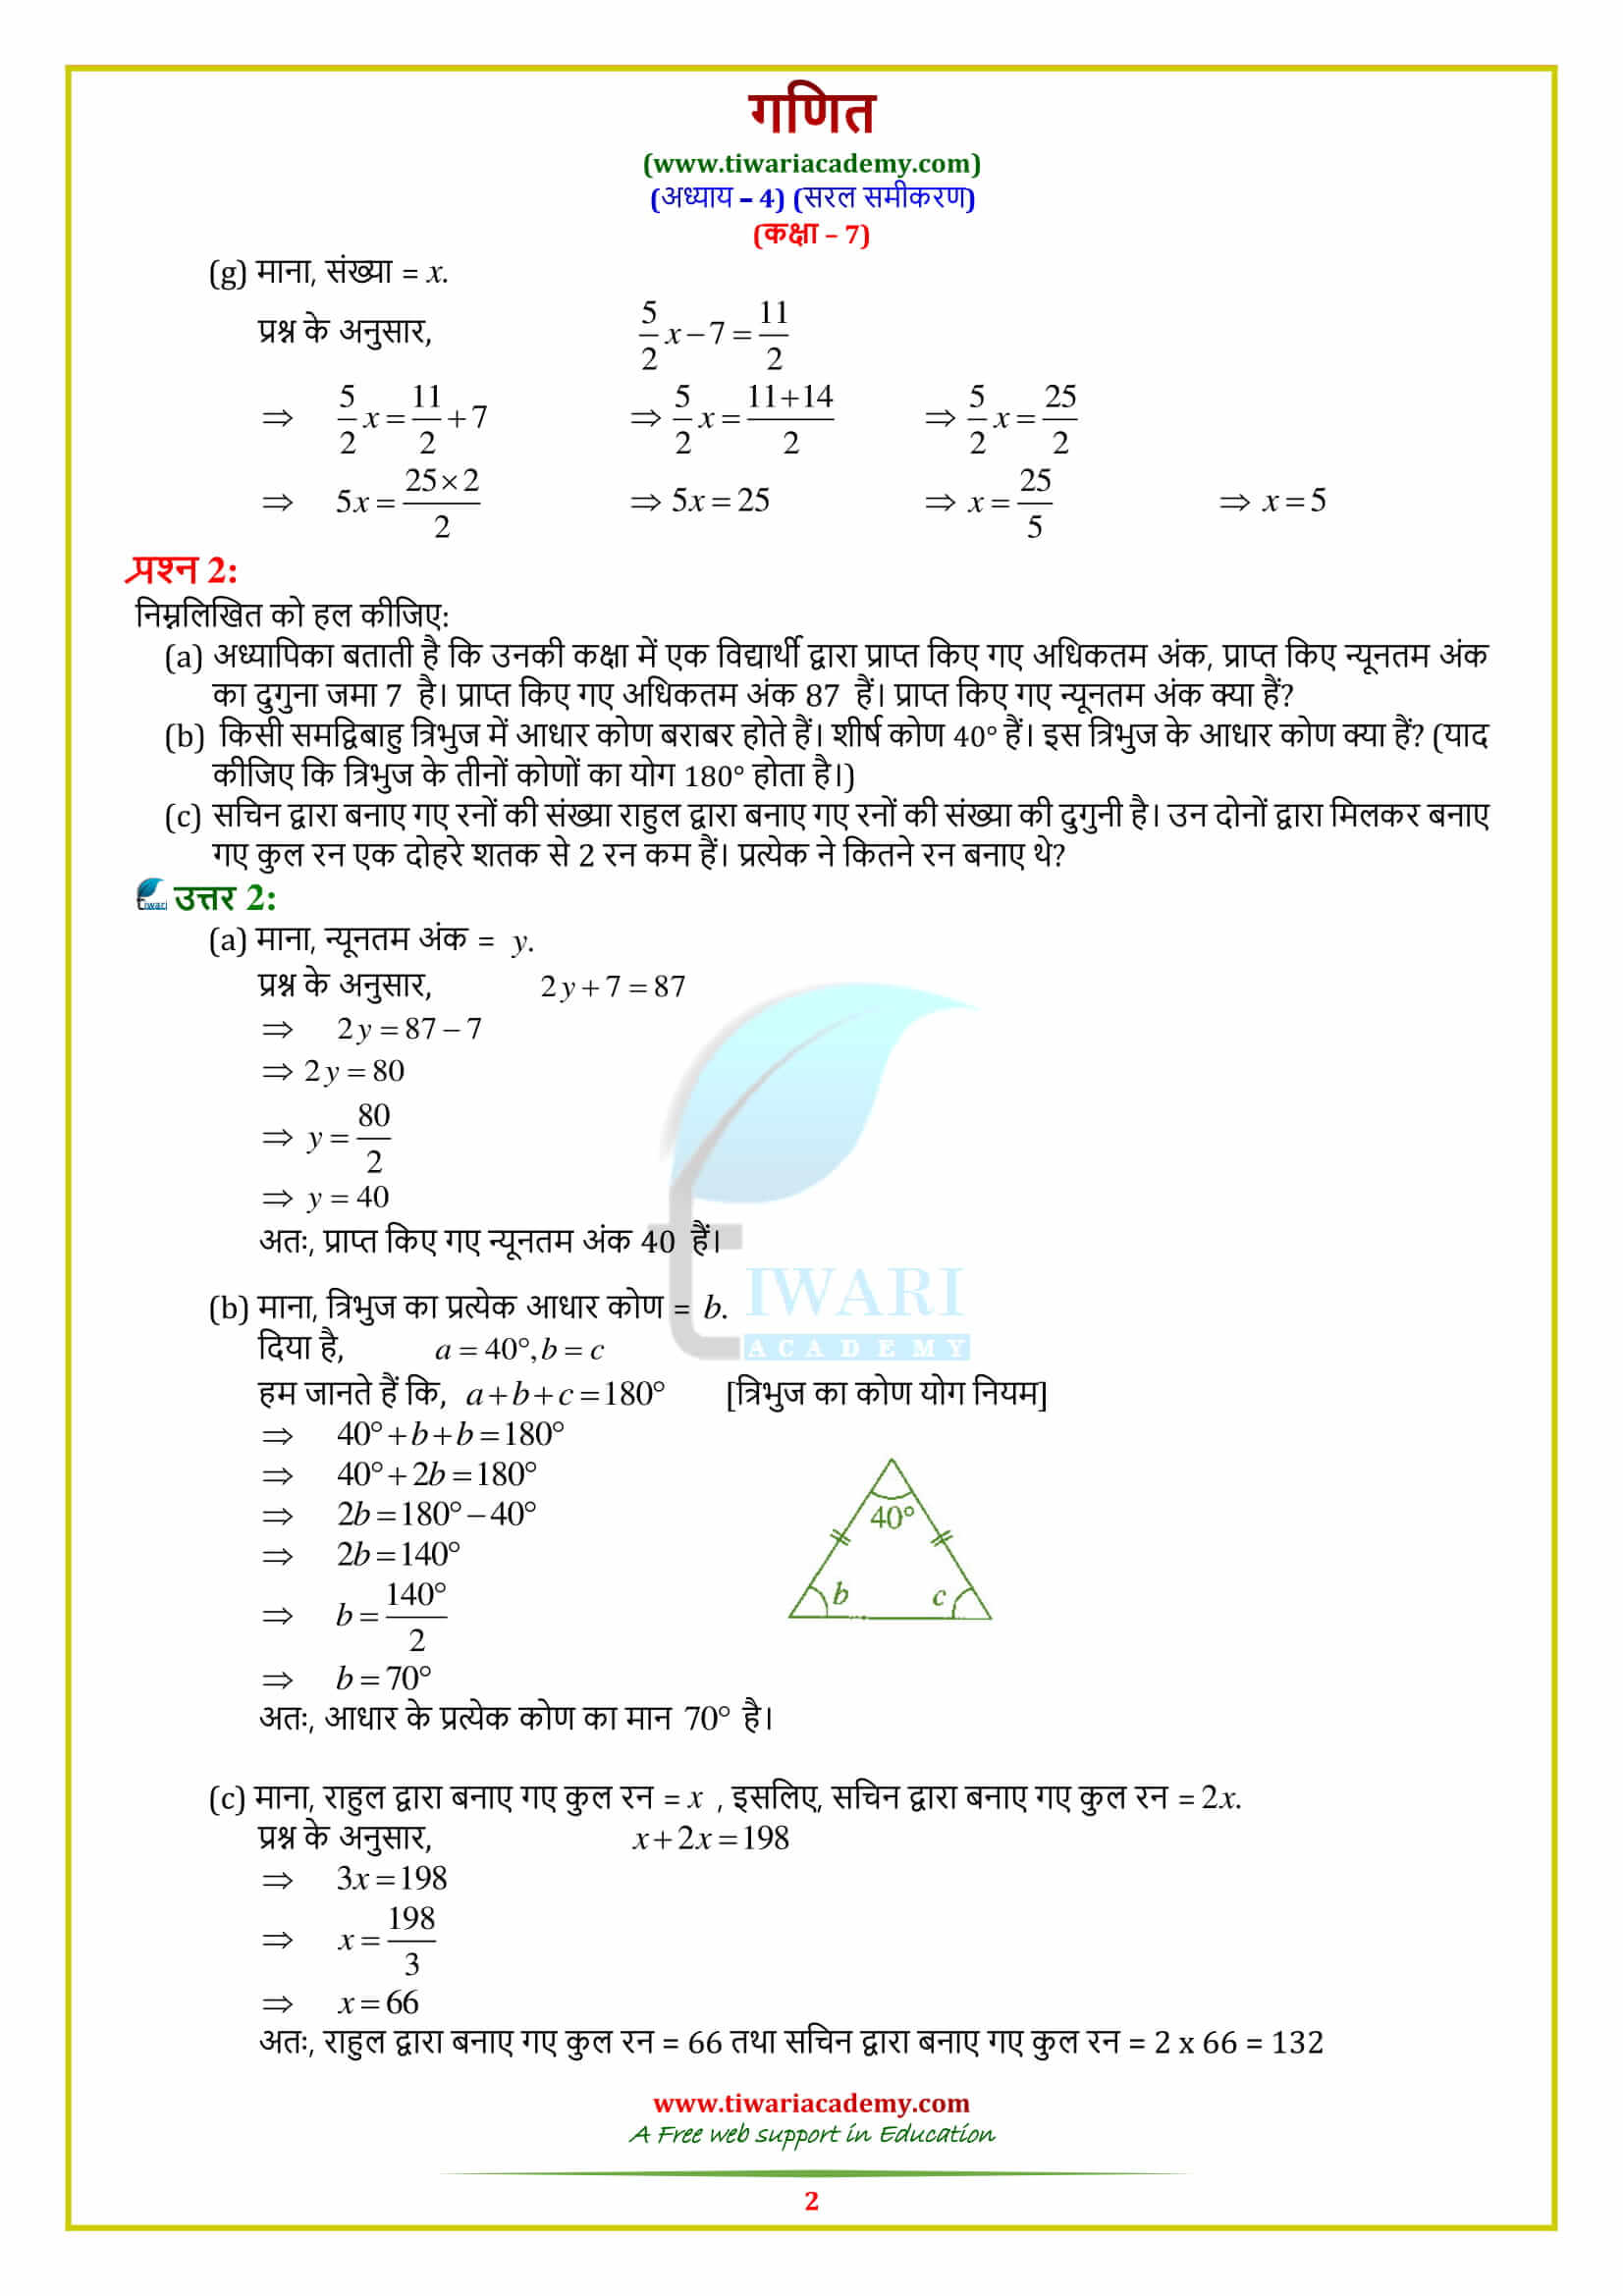 7 Maths Exercise 4.4 Solutions in pdf